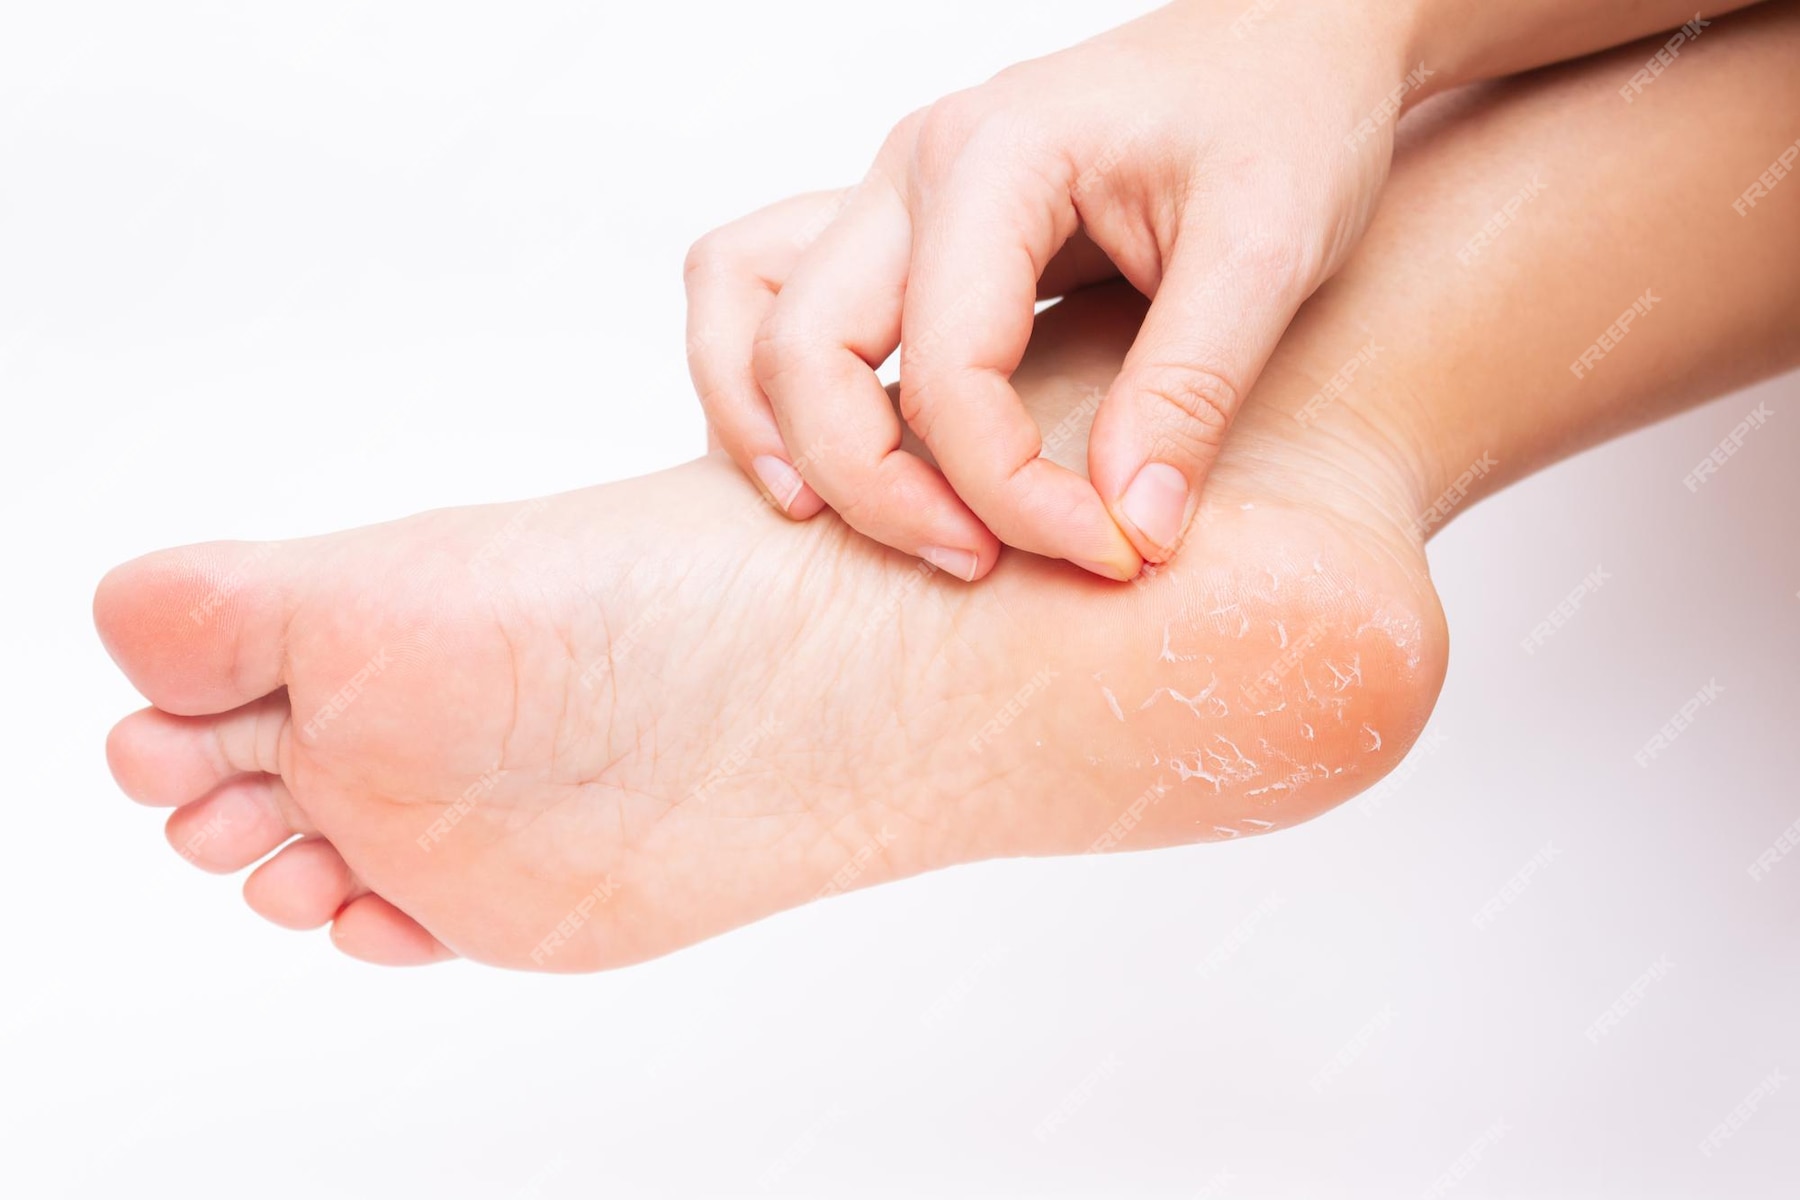 Premium Photo Closeup Of A Womans Foot With Peeling Skin On The Heel